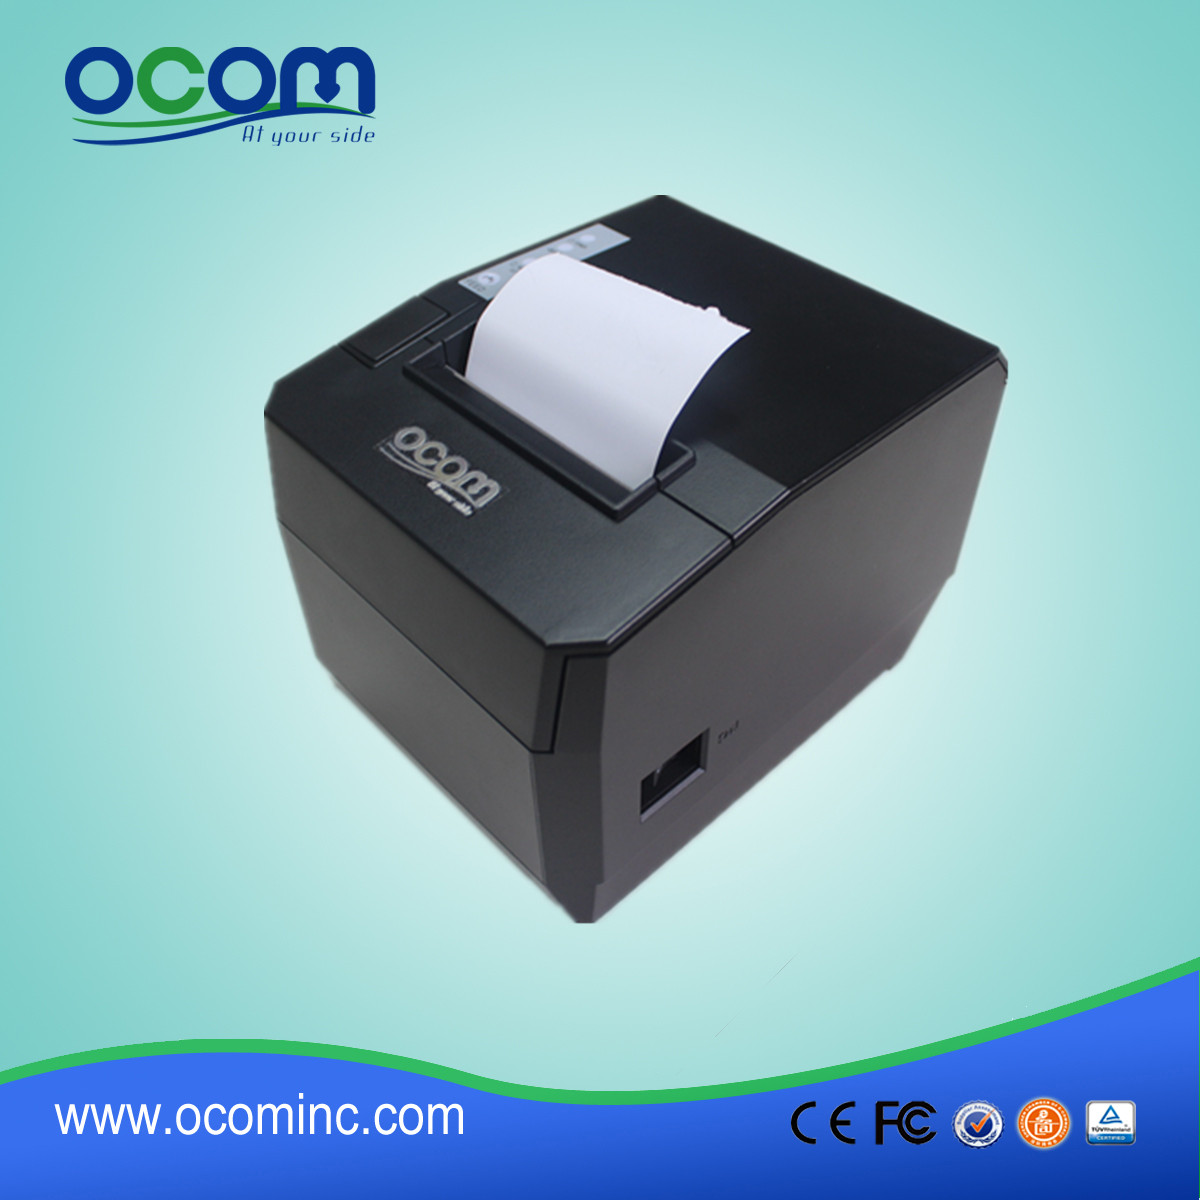 80mm kitchen pos thermal printer with alarmer optional OCPP-88A